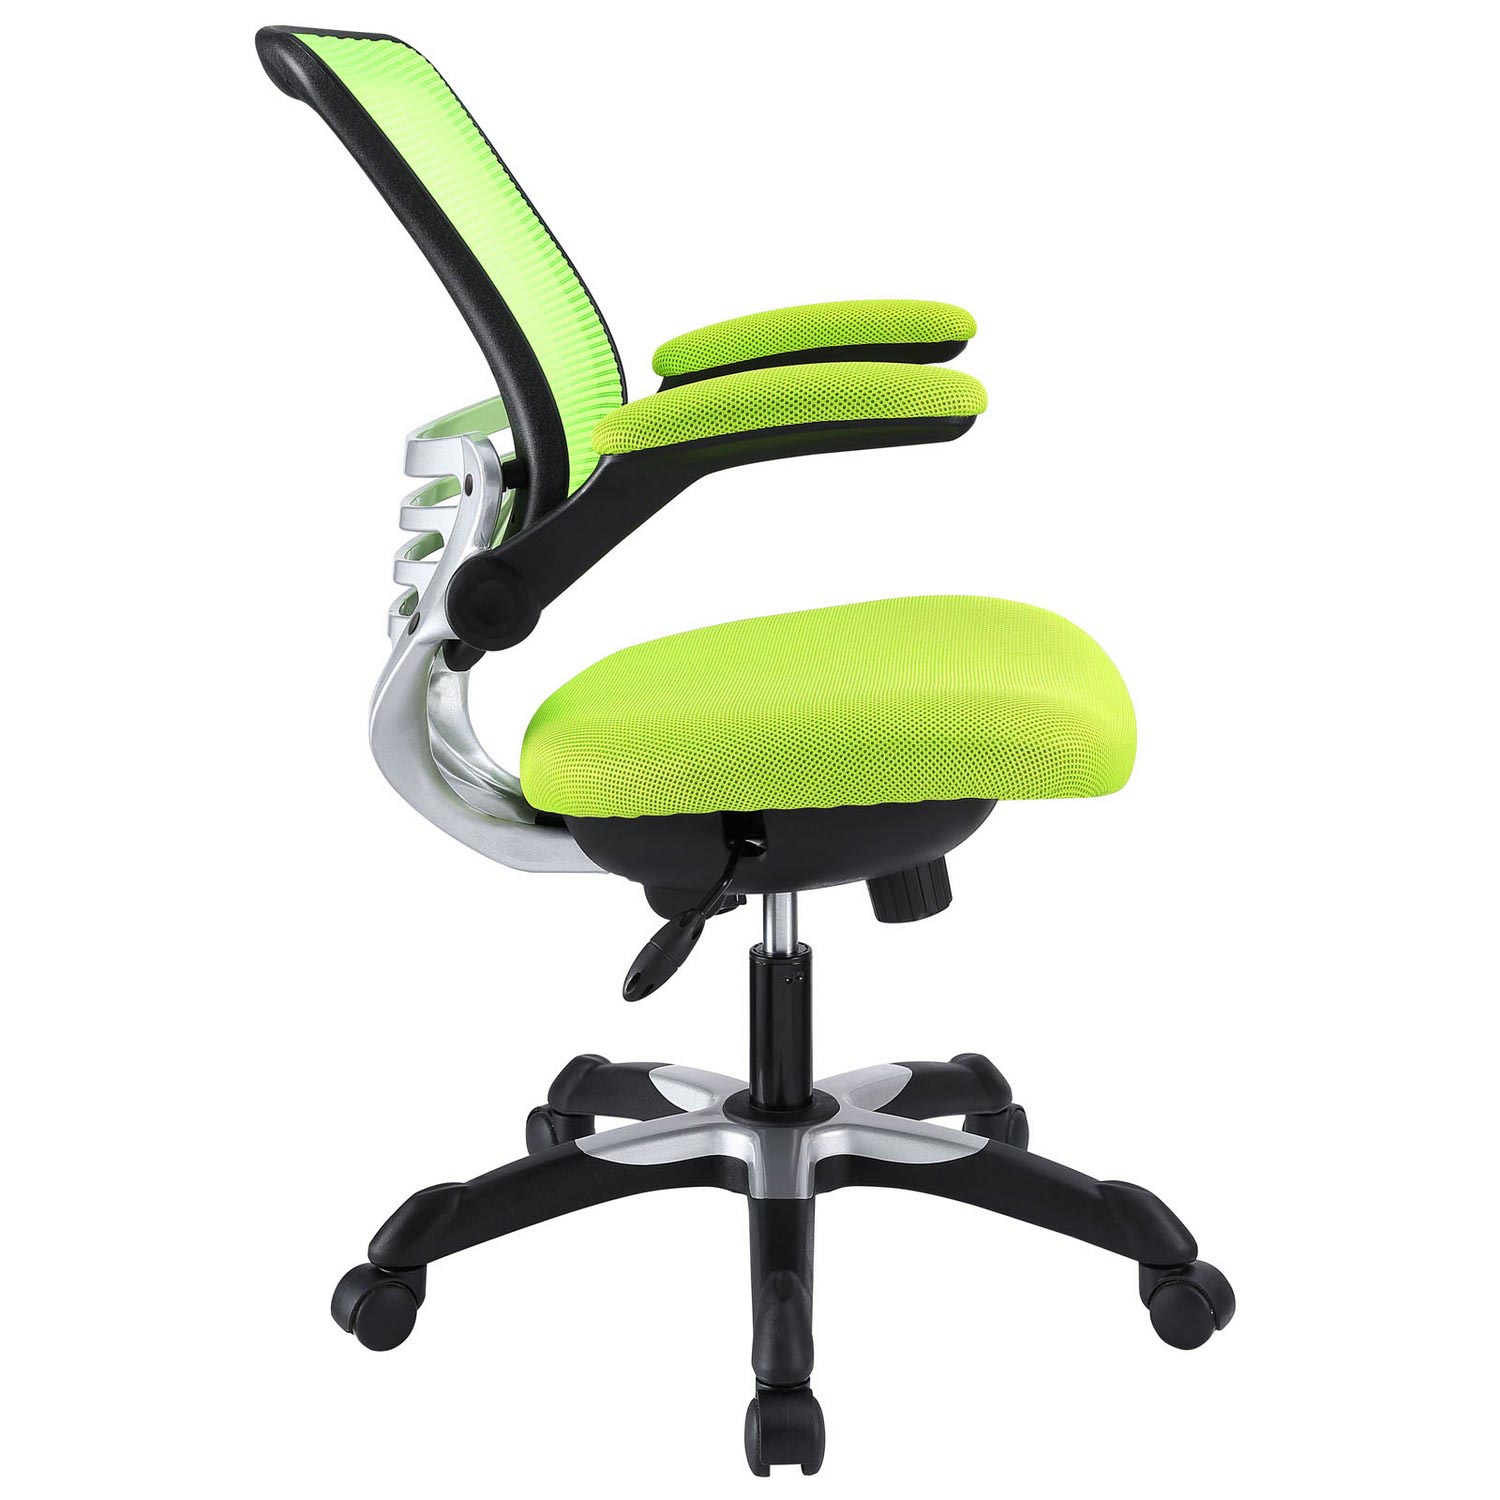 Modway Edge Office Chair - Green